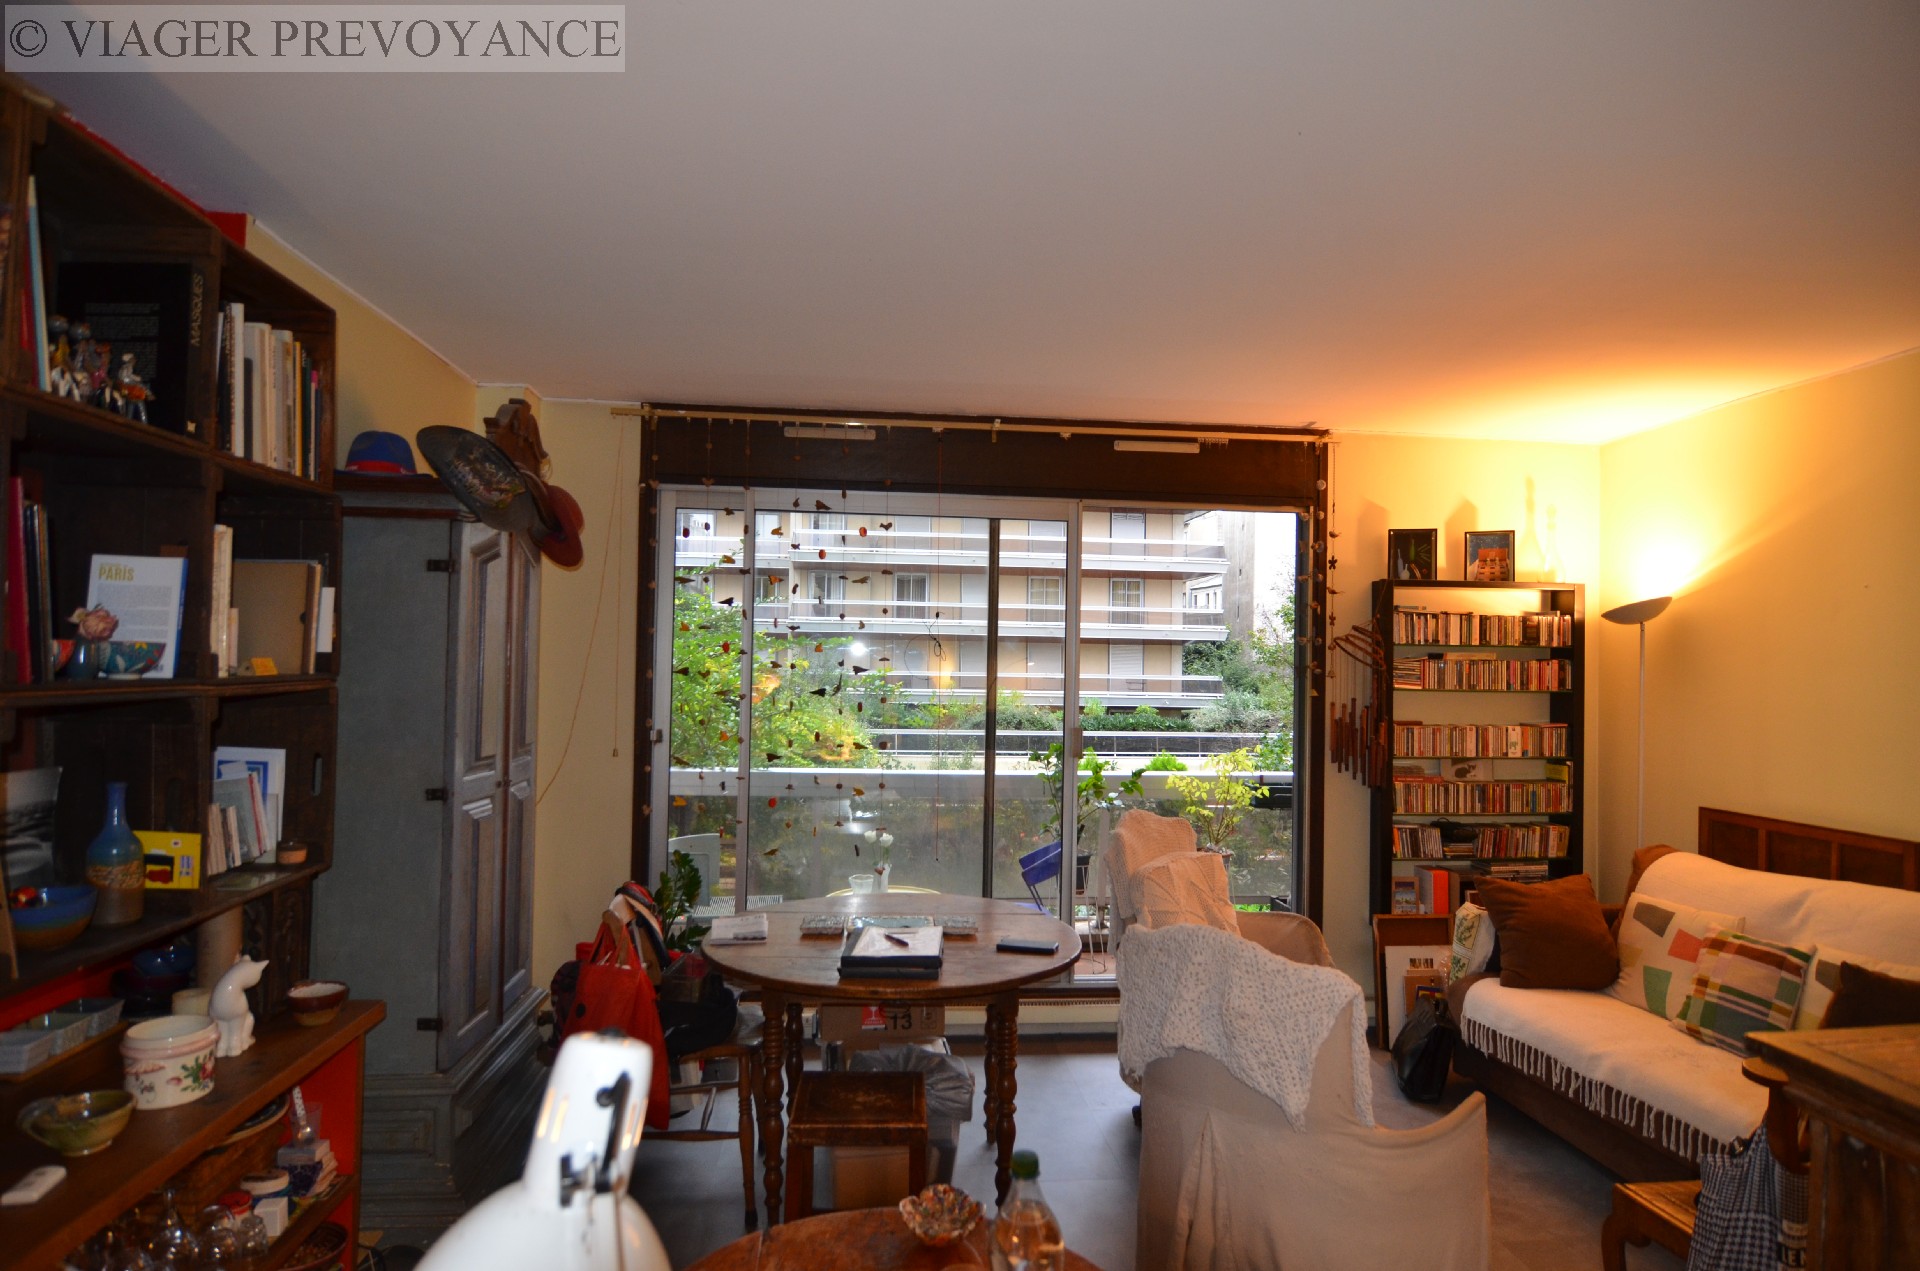 Apartment A property to buy, , 39 m², 2 rooms